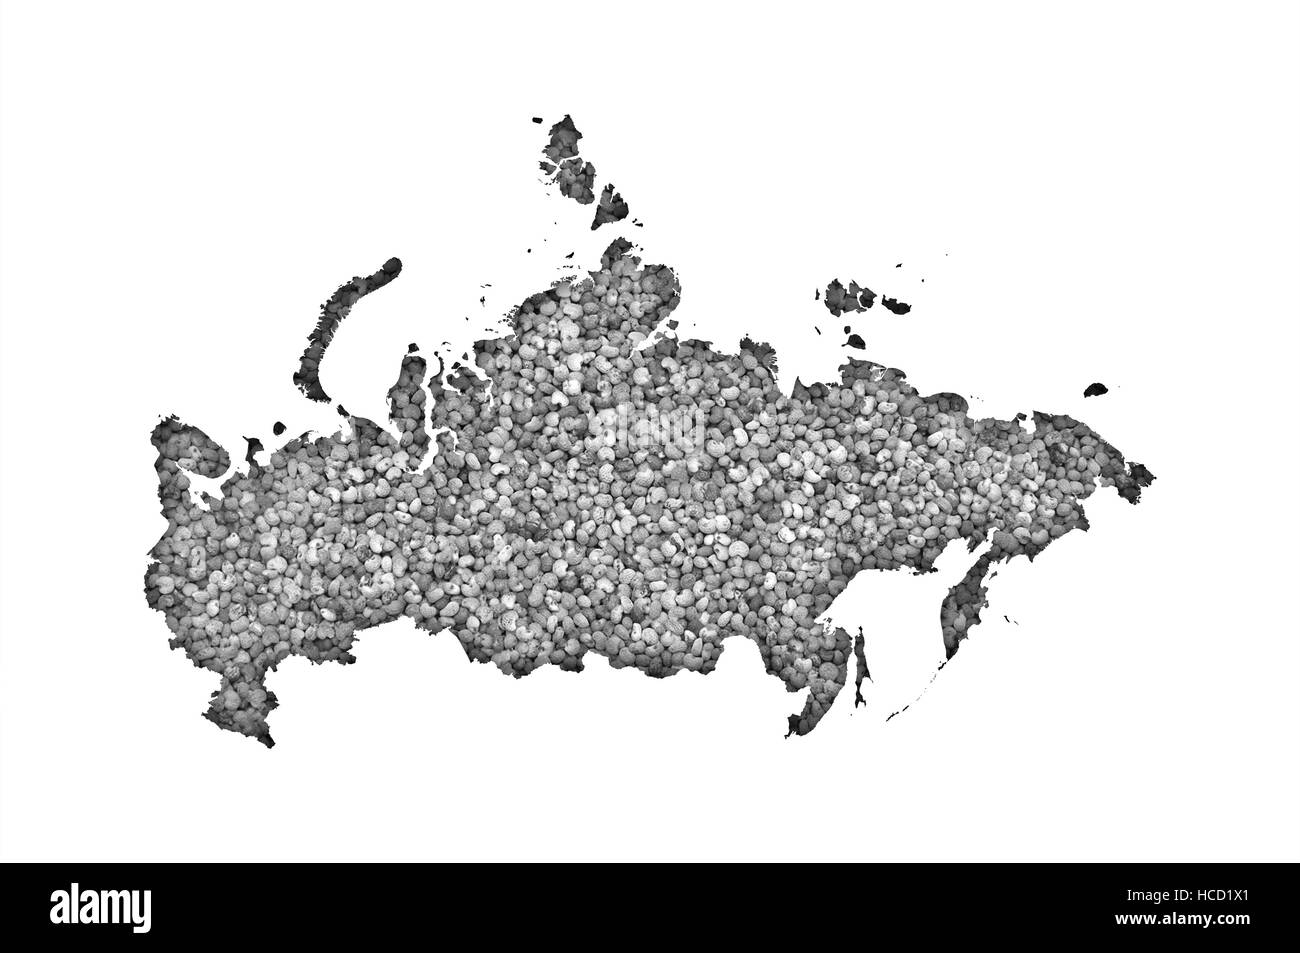 Map of Russia on poppy seeds Stock Photo